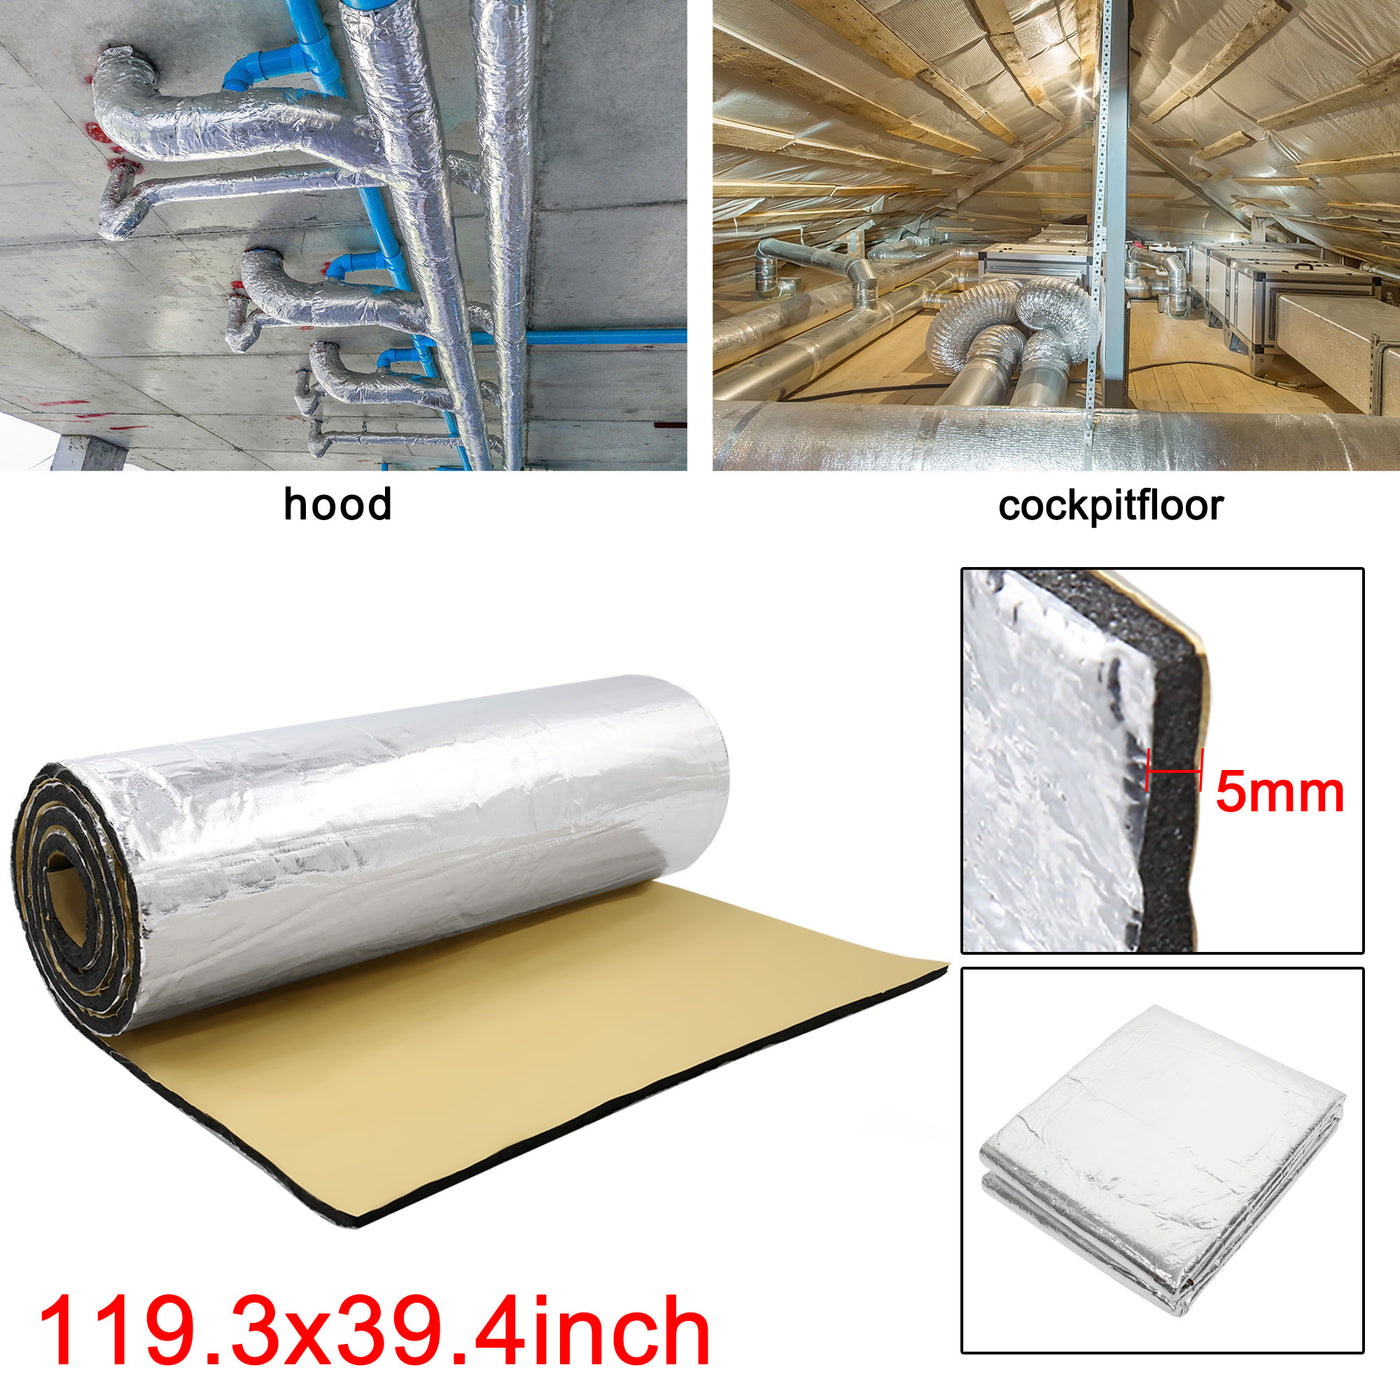 uxcell Uxcell 197mil 32.6sqft Heat Sound Deadening Mat for Factory Farm Roof and Water Pipe Thermal Acoustic Insulation 119.3x39.4inch